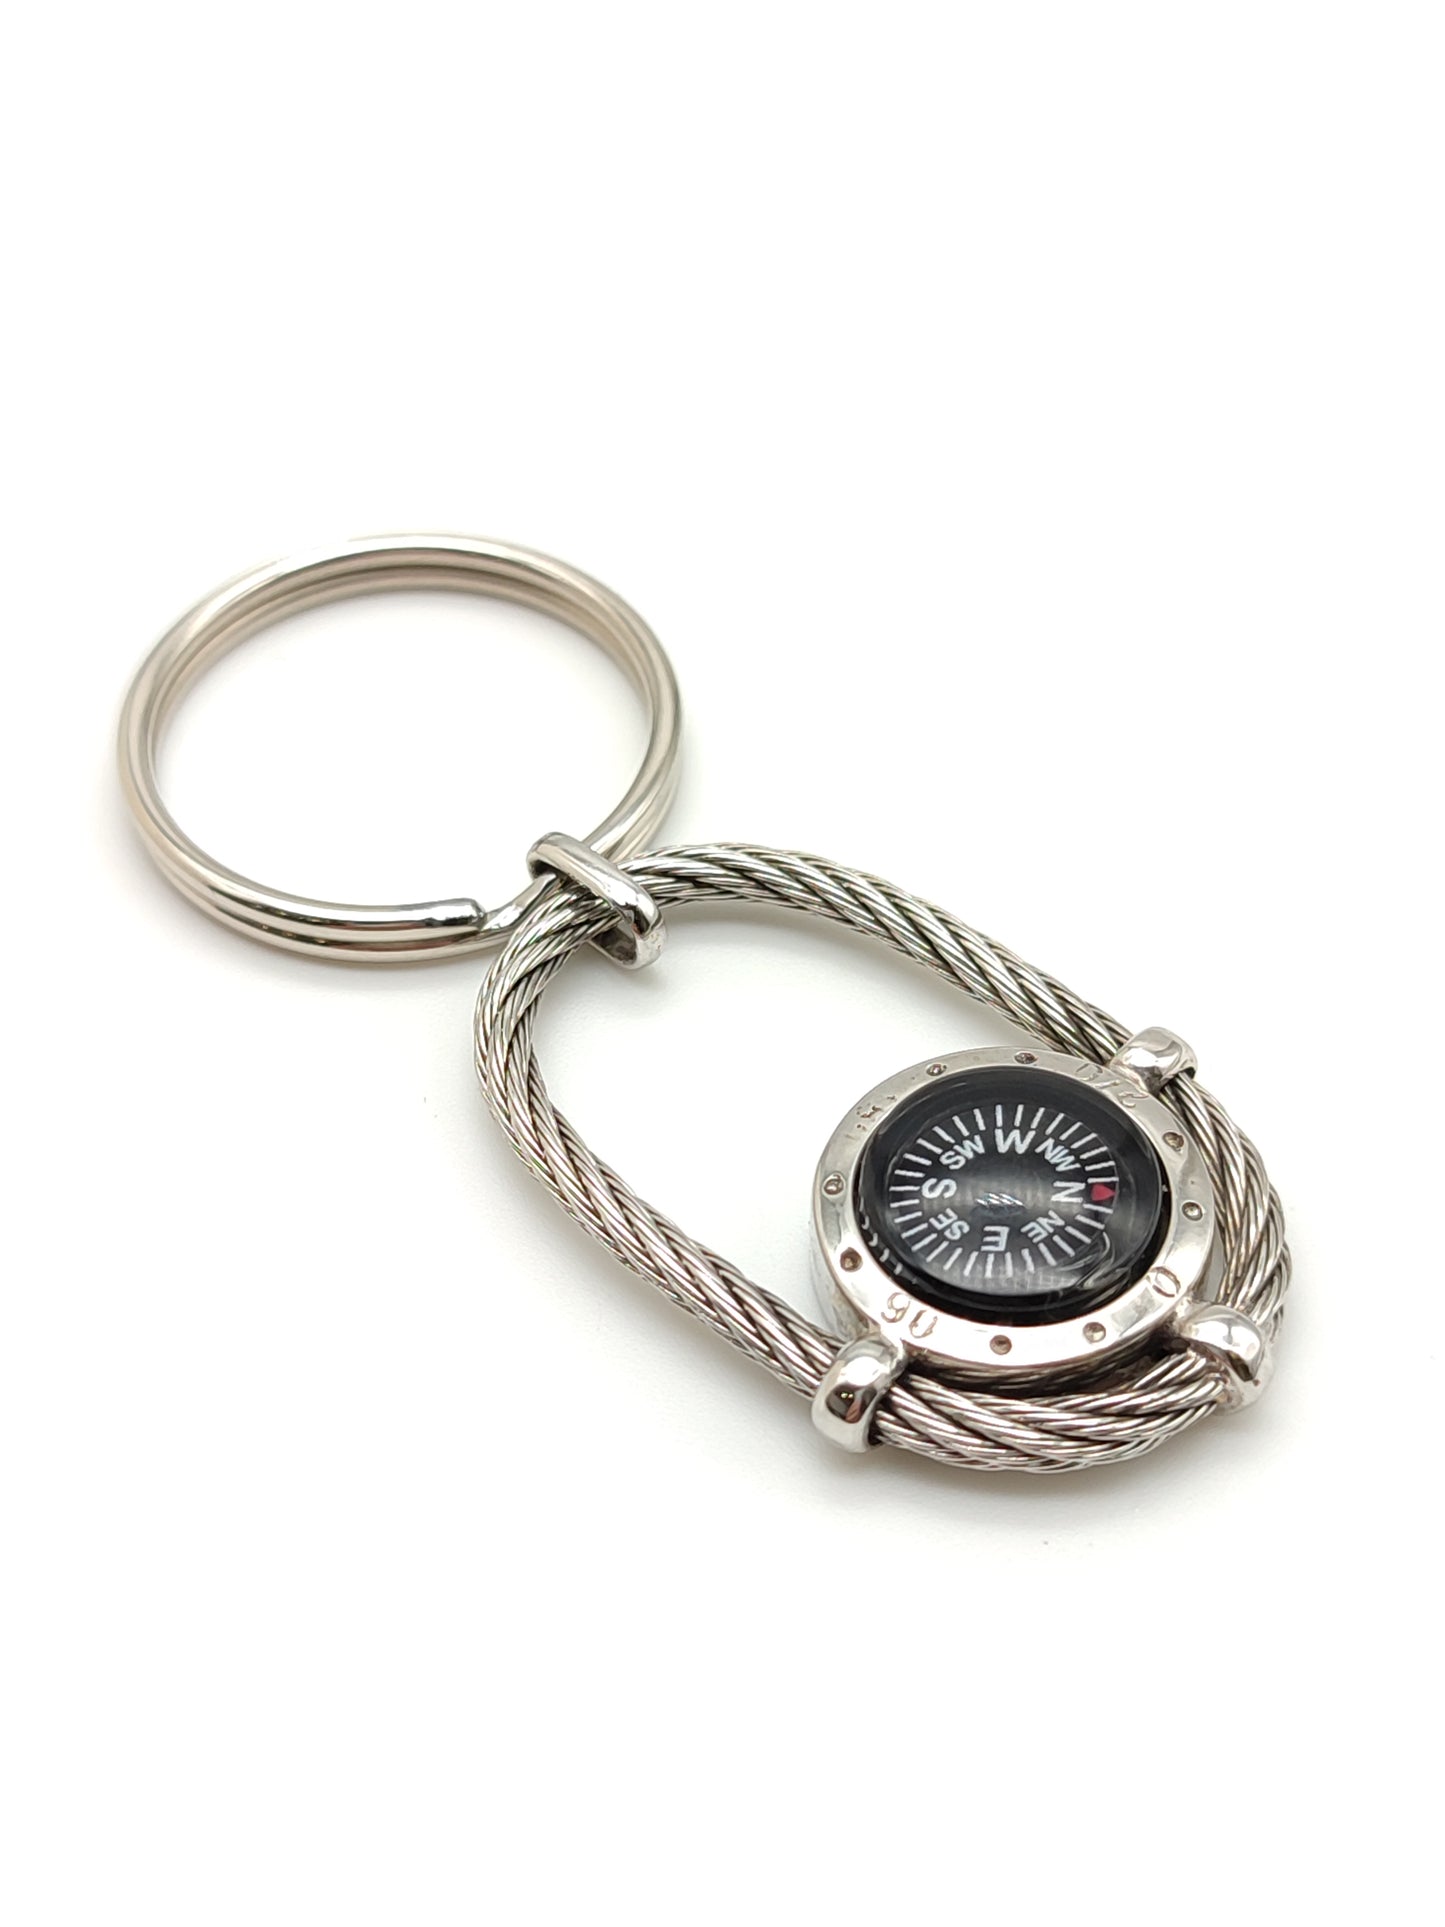 Silver and steel key ring with compass